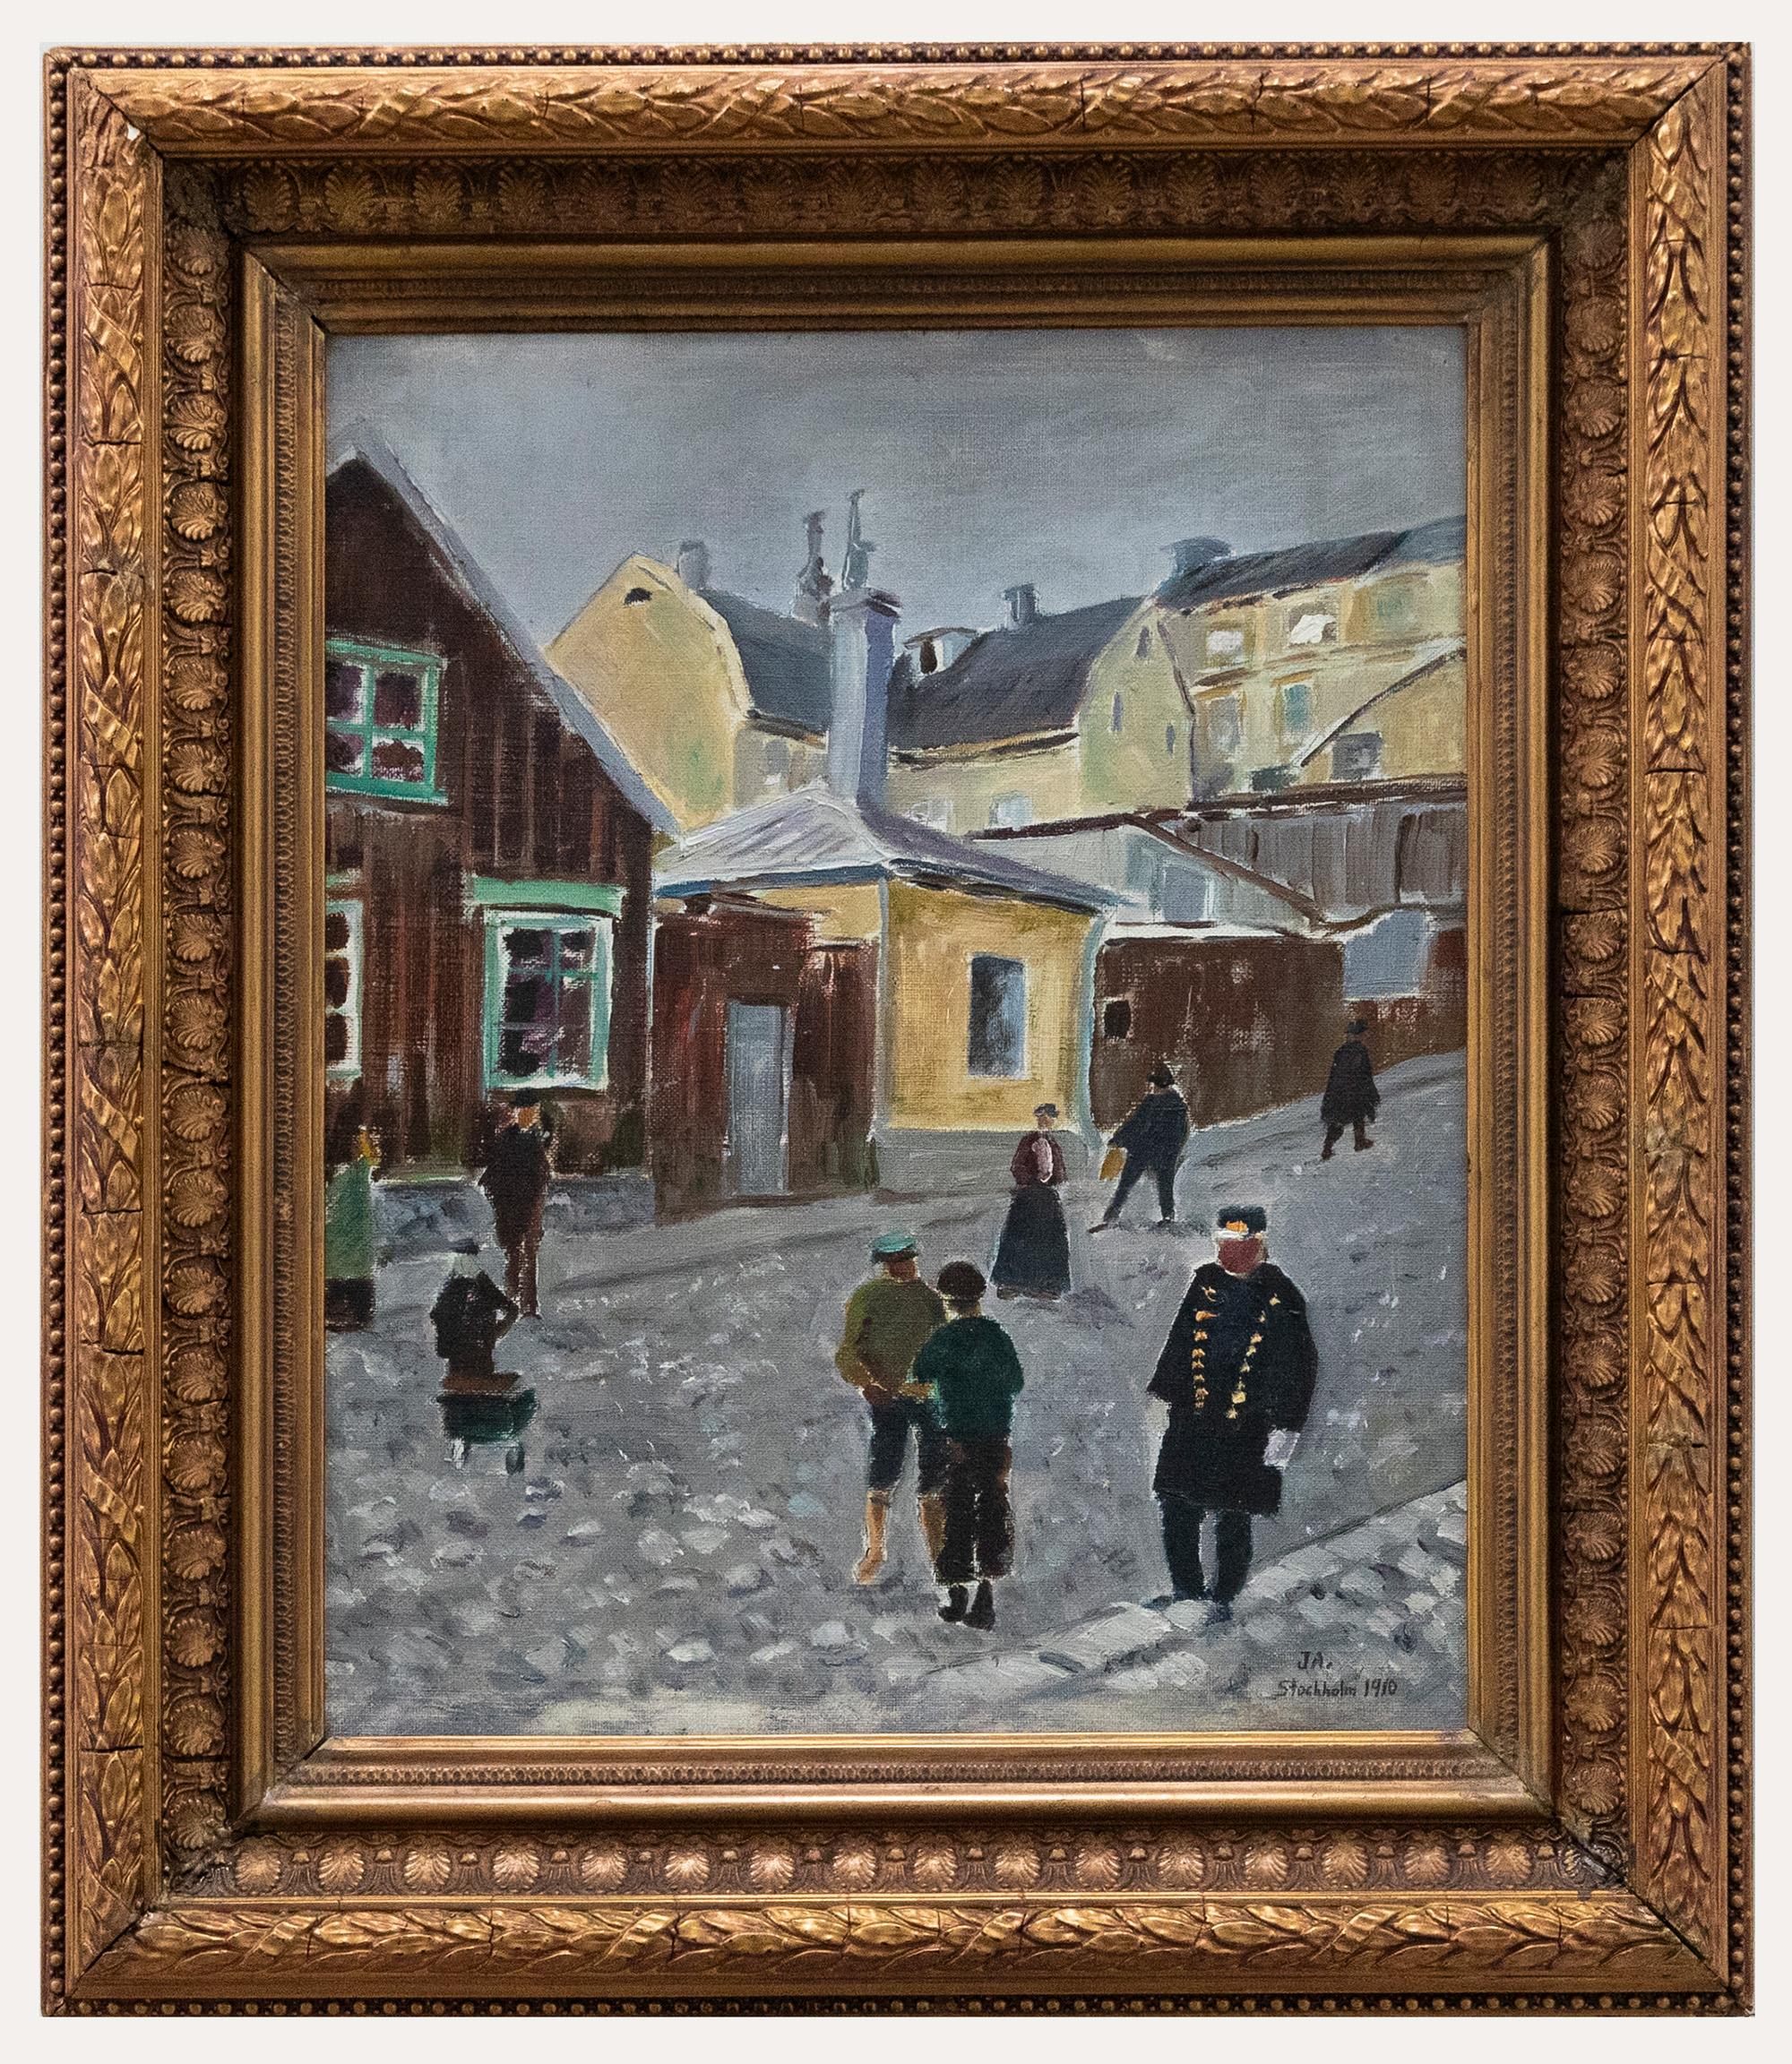 Unknown Landscape Painting - J.A - Framed 20th Century Oil, A Cobbled Street in Stockholm